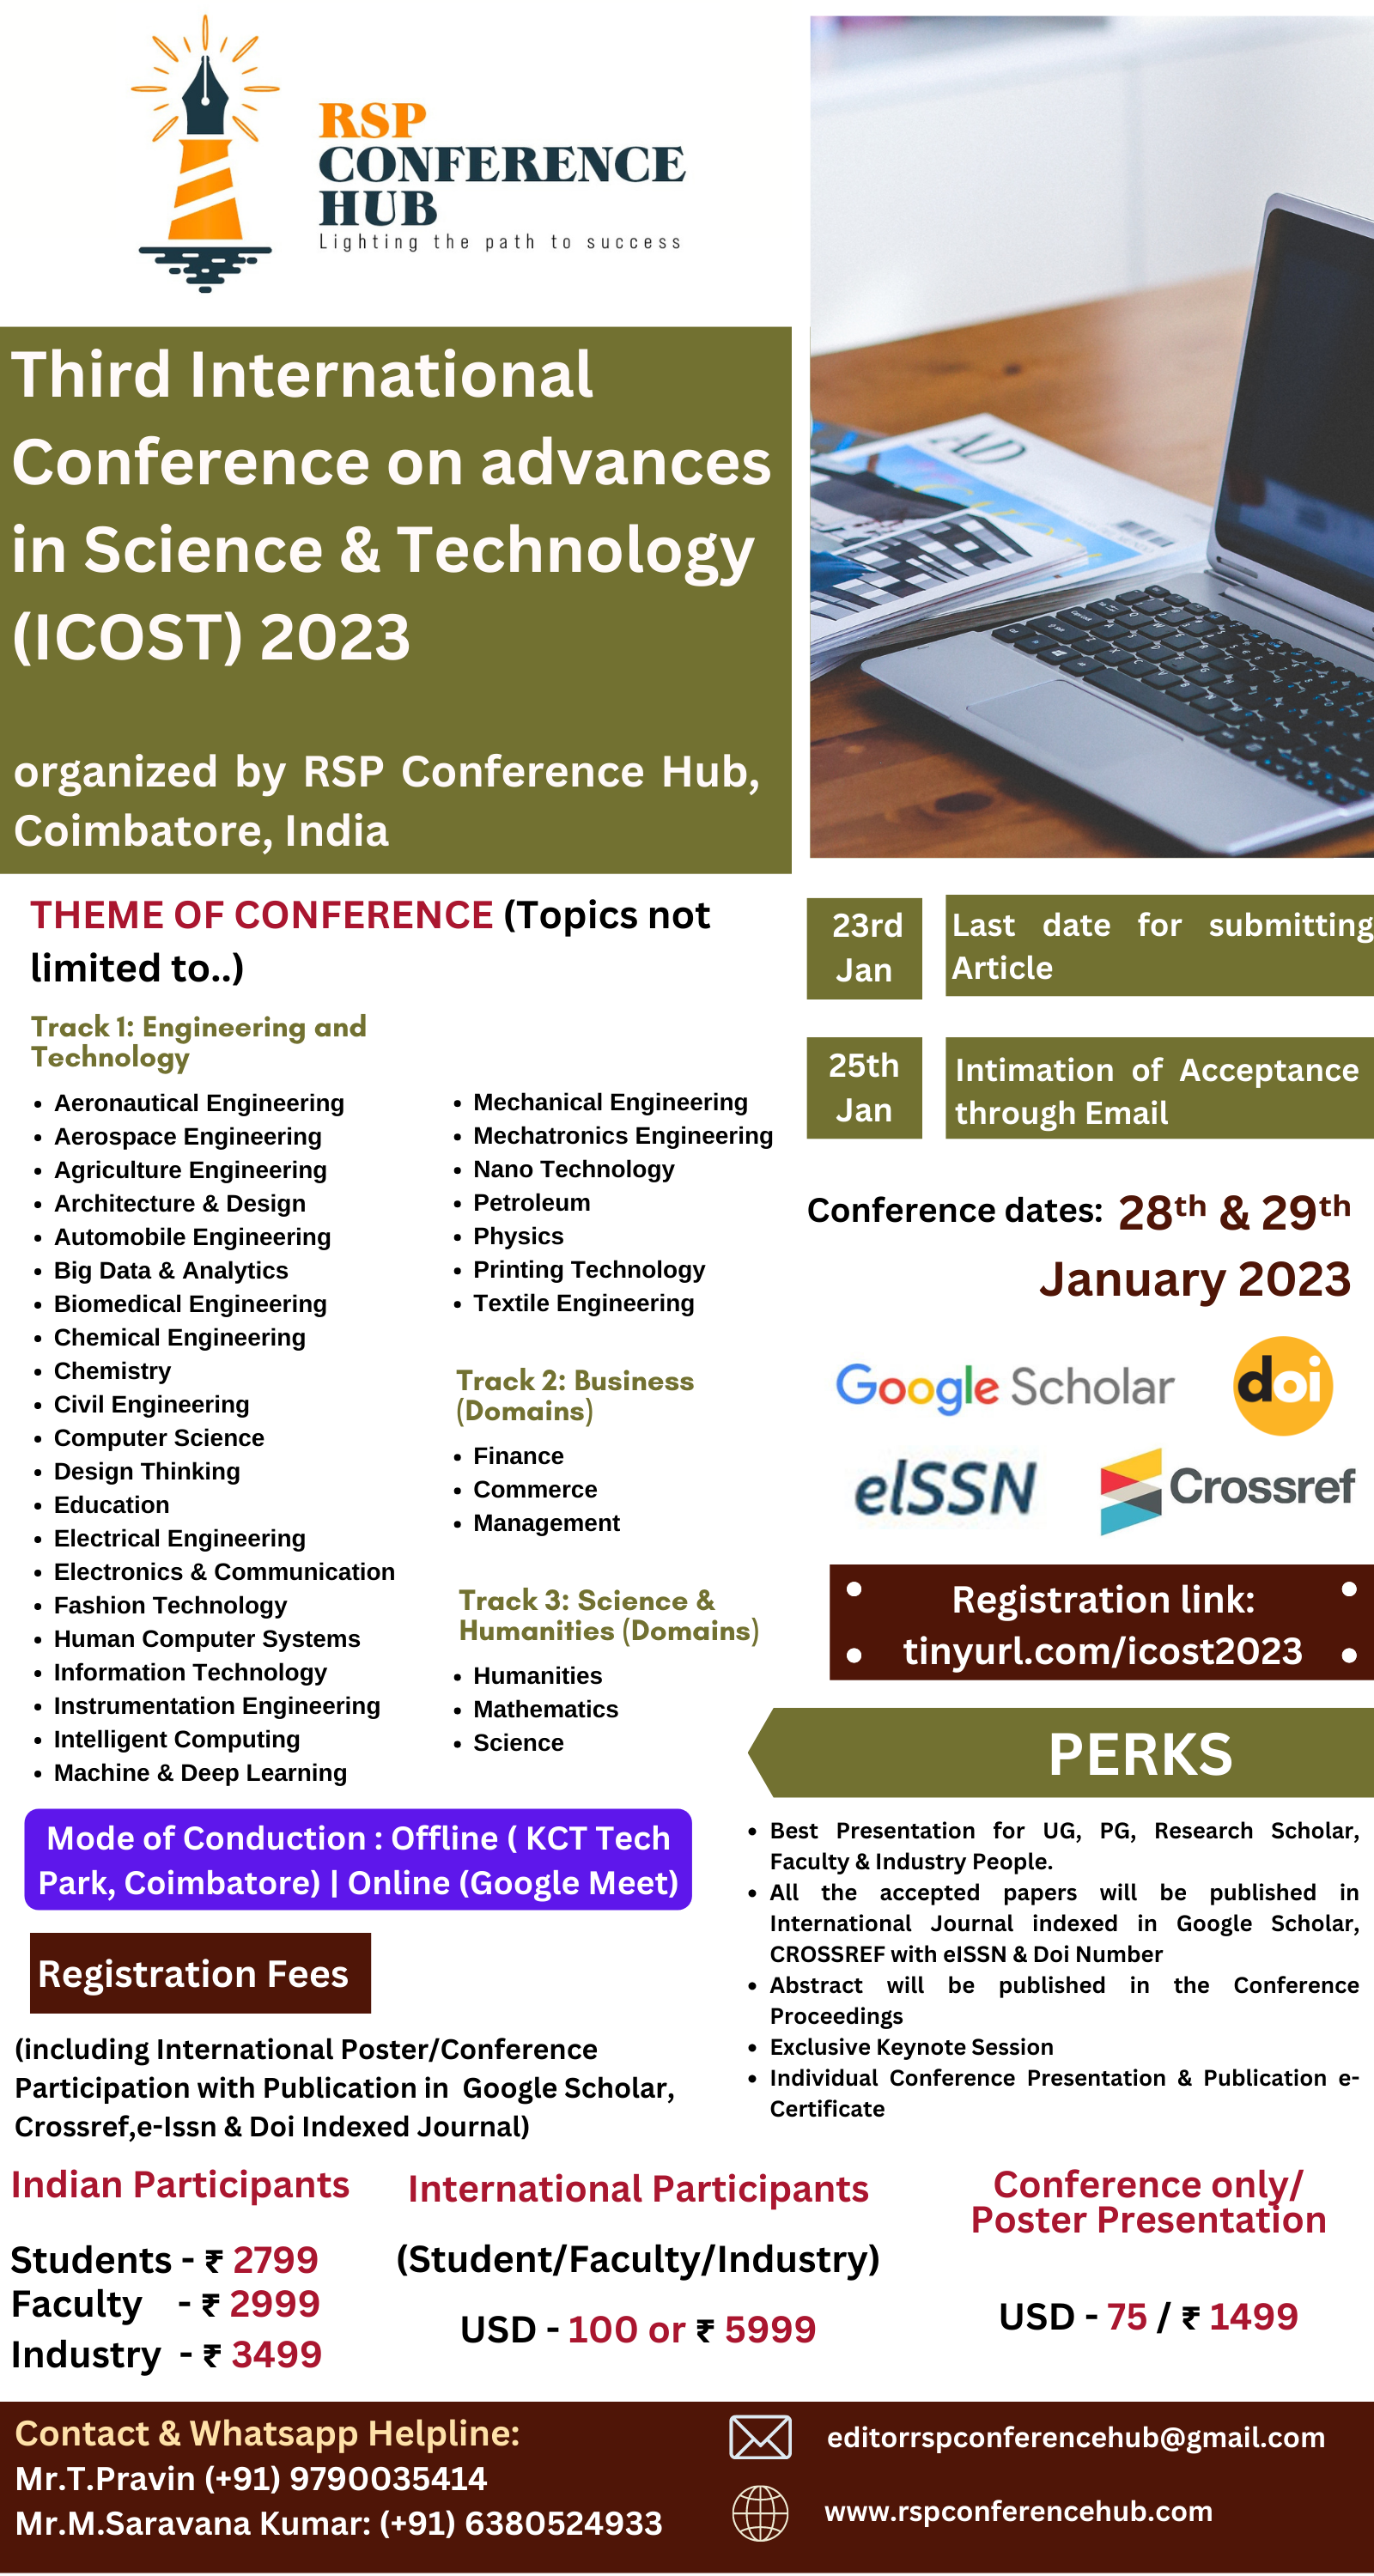 Third International Conference on advances in Science and Technology ICOST 2023